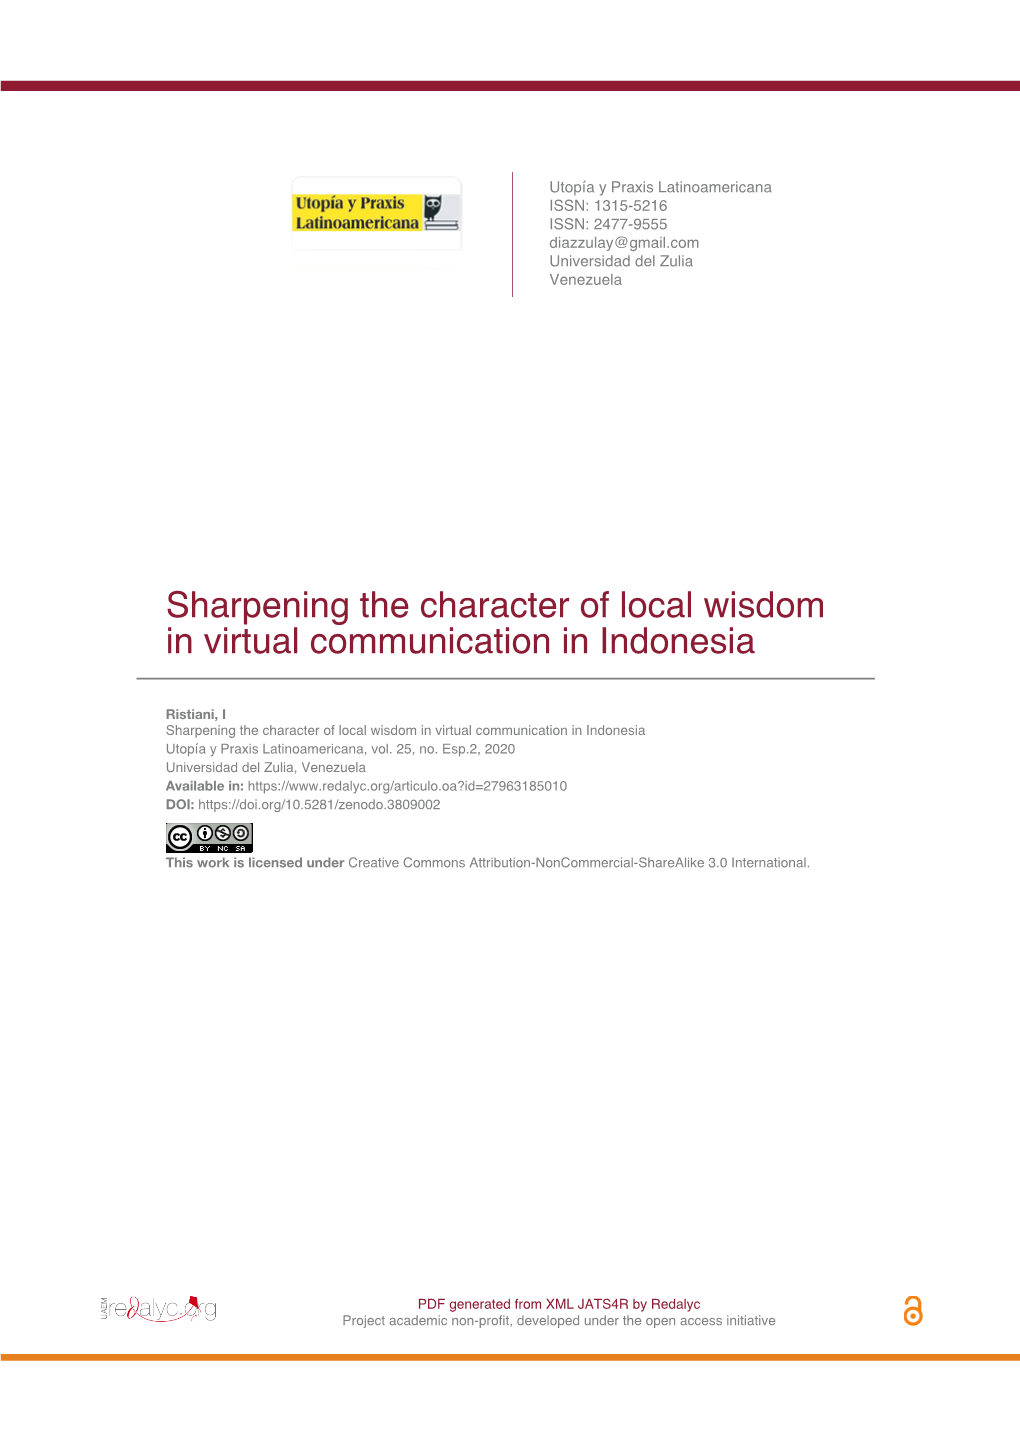 Sharpening the Character of Local Wisdom in Virtual Communication in Indonesia